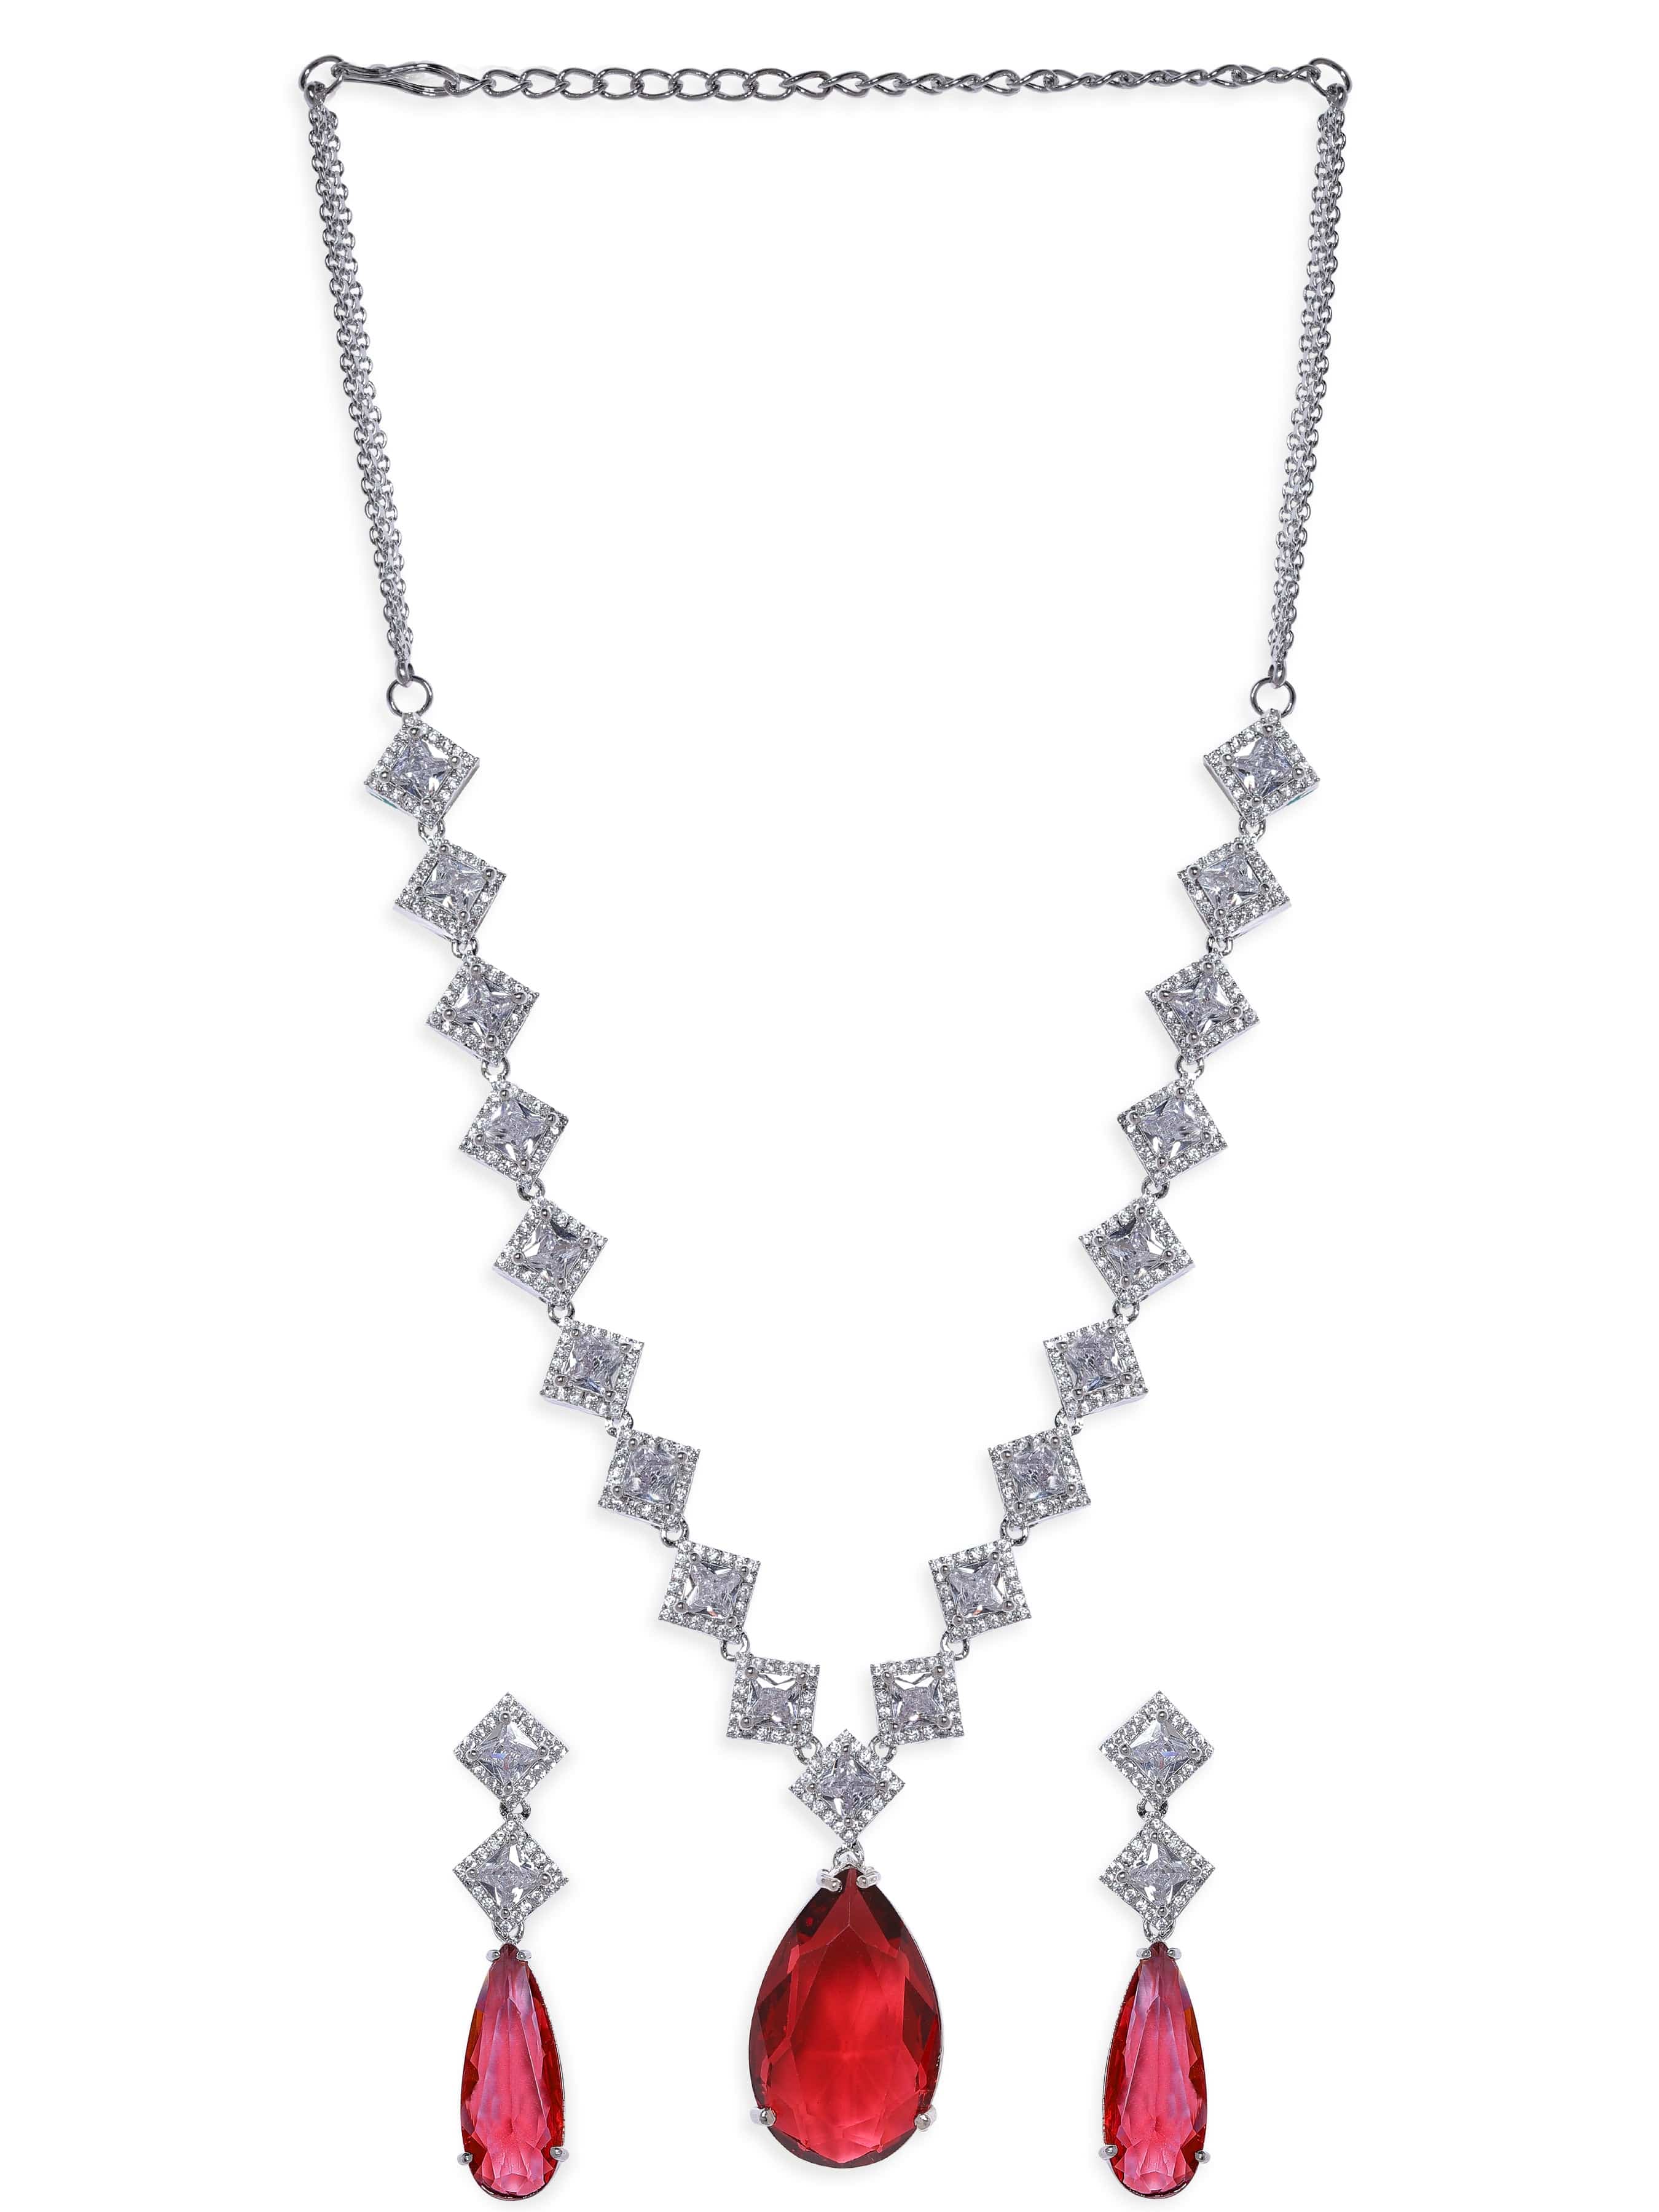 Ruby Pendant Sterling Silver Pear Shape | SP11258 | Peora.com